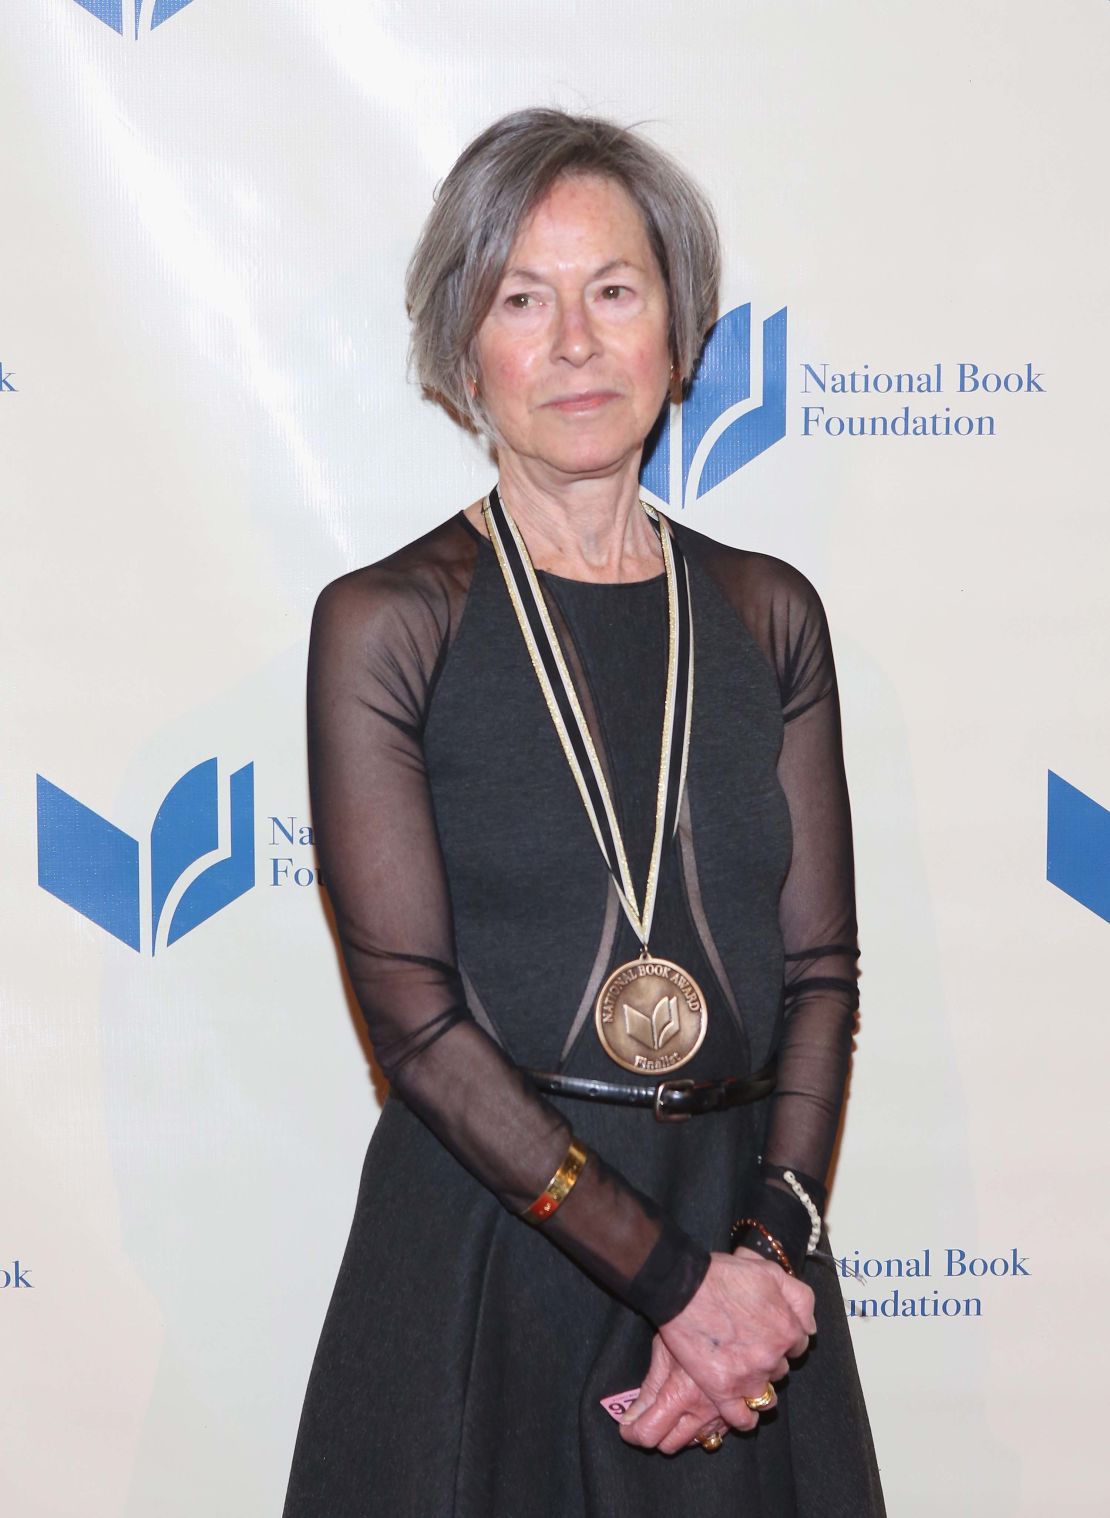 Glück won the Pulitzer Prize in 1993 and the National Book Award in 2014.